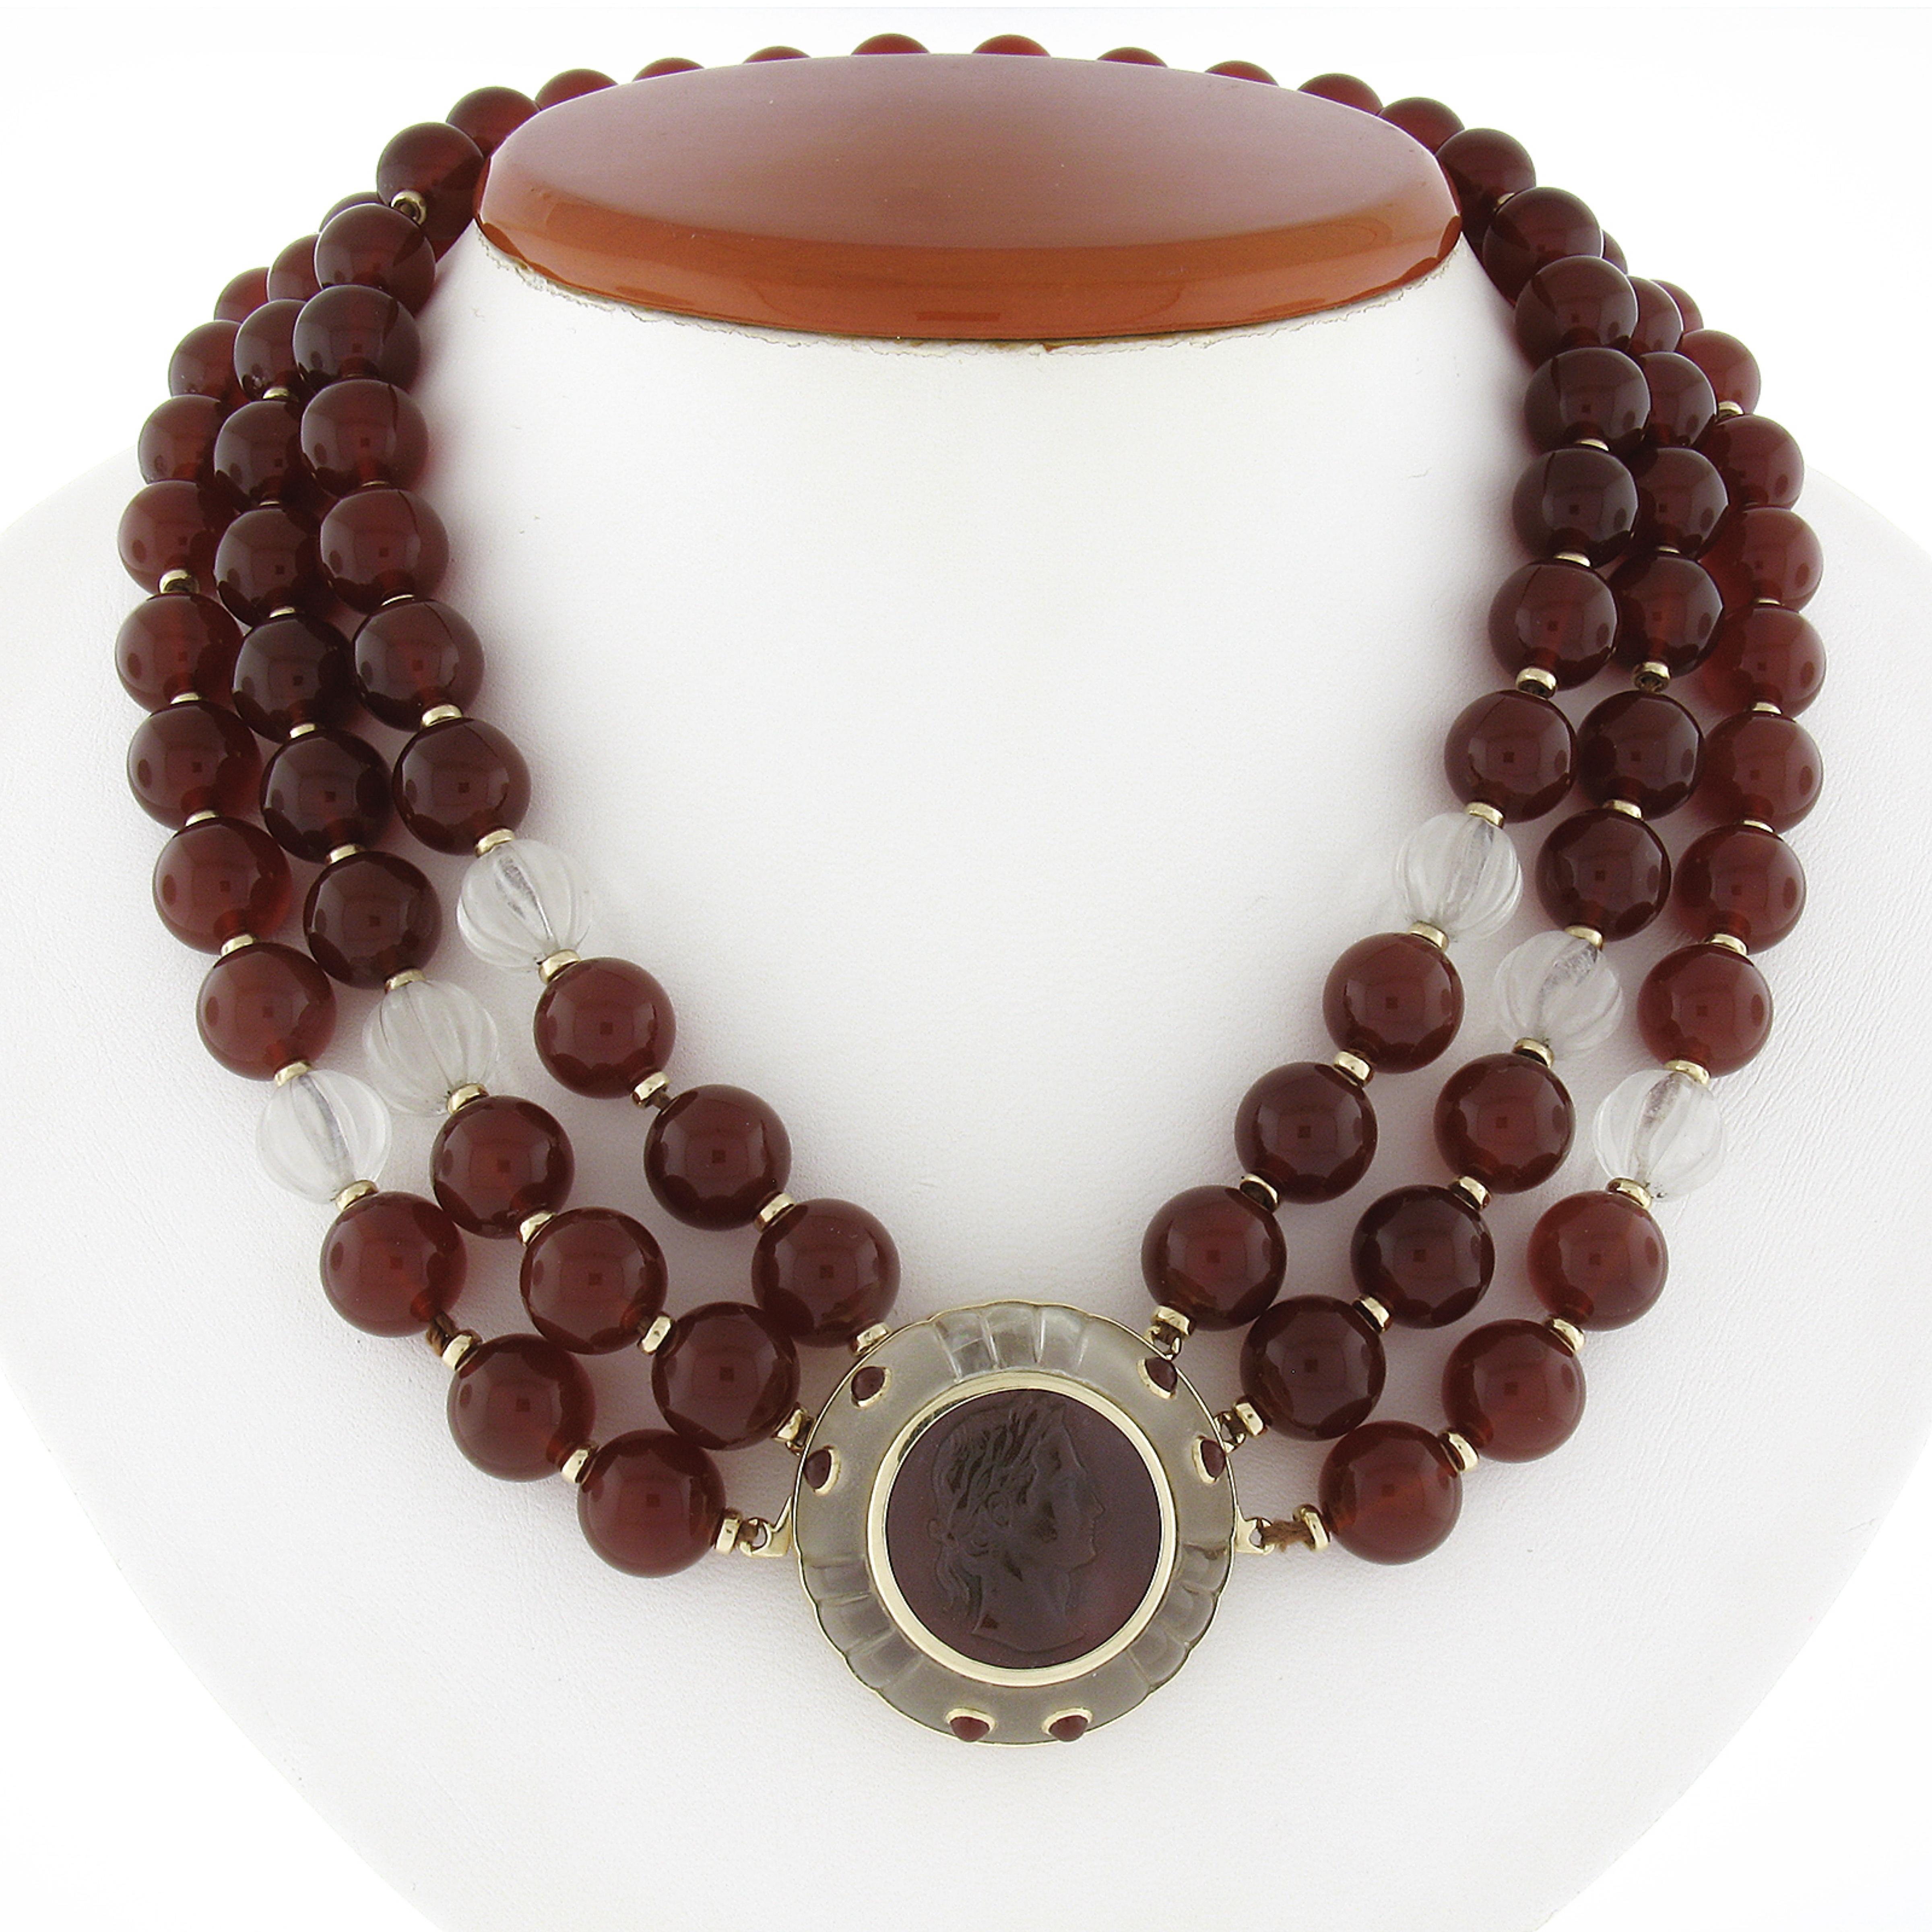 Here we have an absolutely magnificent estate carnelian and rock crystal bead 3 strand necklace that features an incredible cameo carved carnelian pendant set in solid 14k yellow gold with a grooved rock crystal frame. The carnelian on this pendant